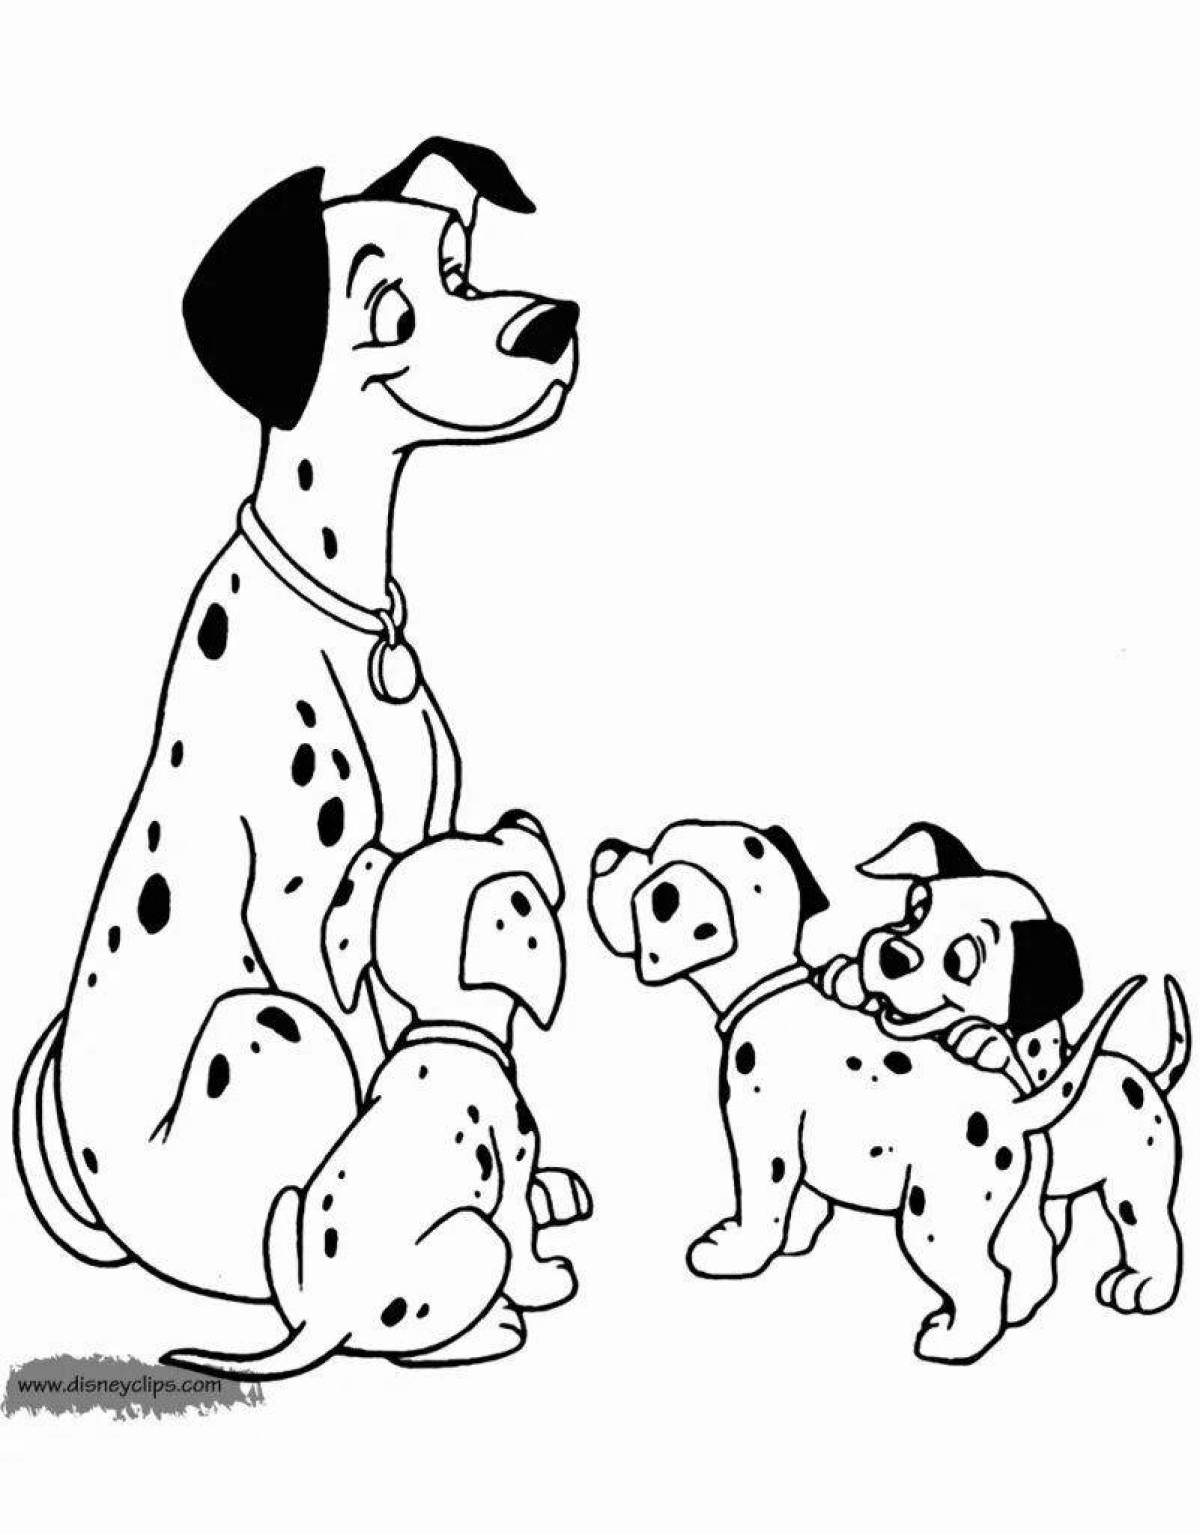 Adorable dog family coloring page